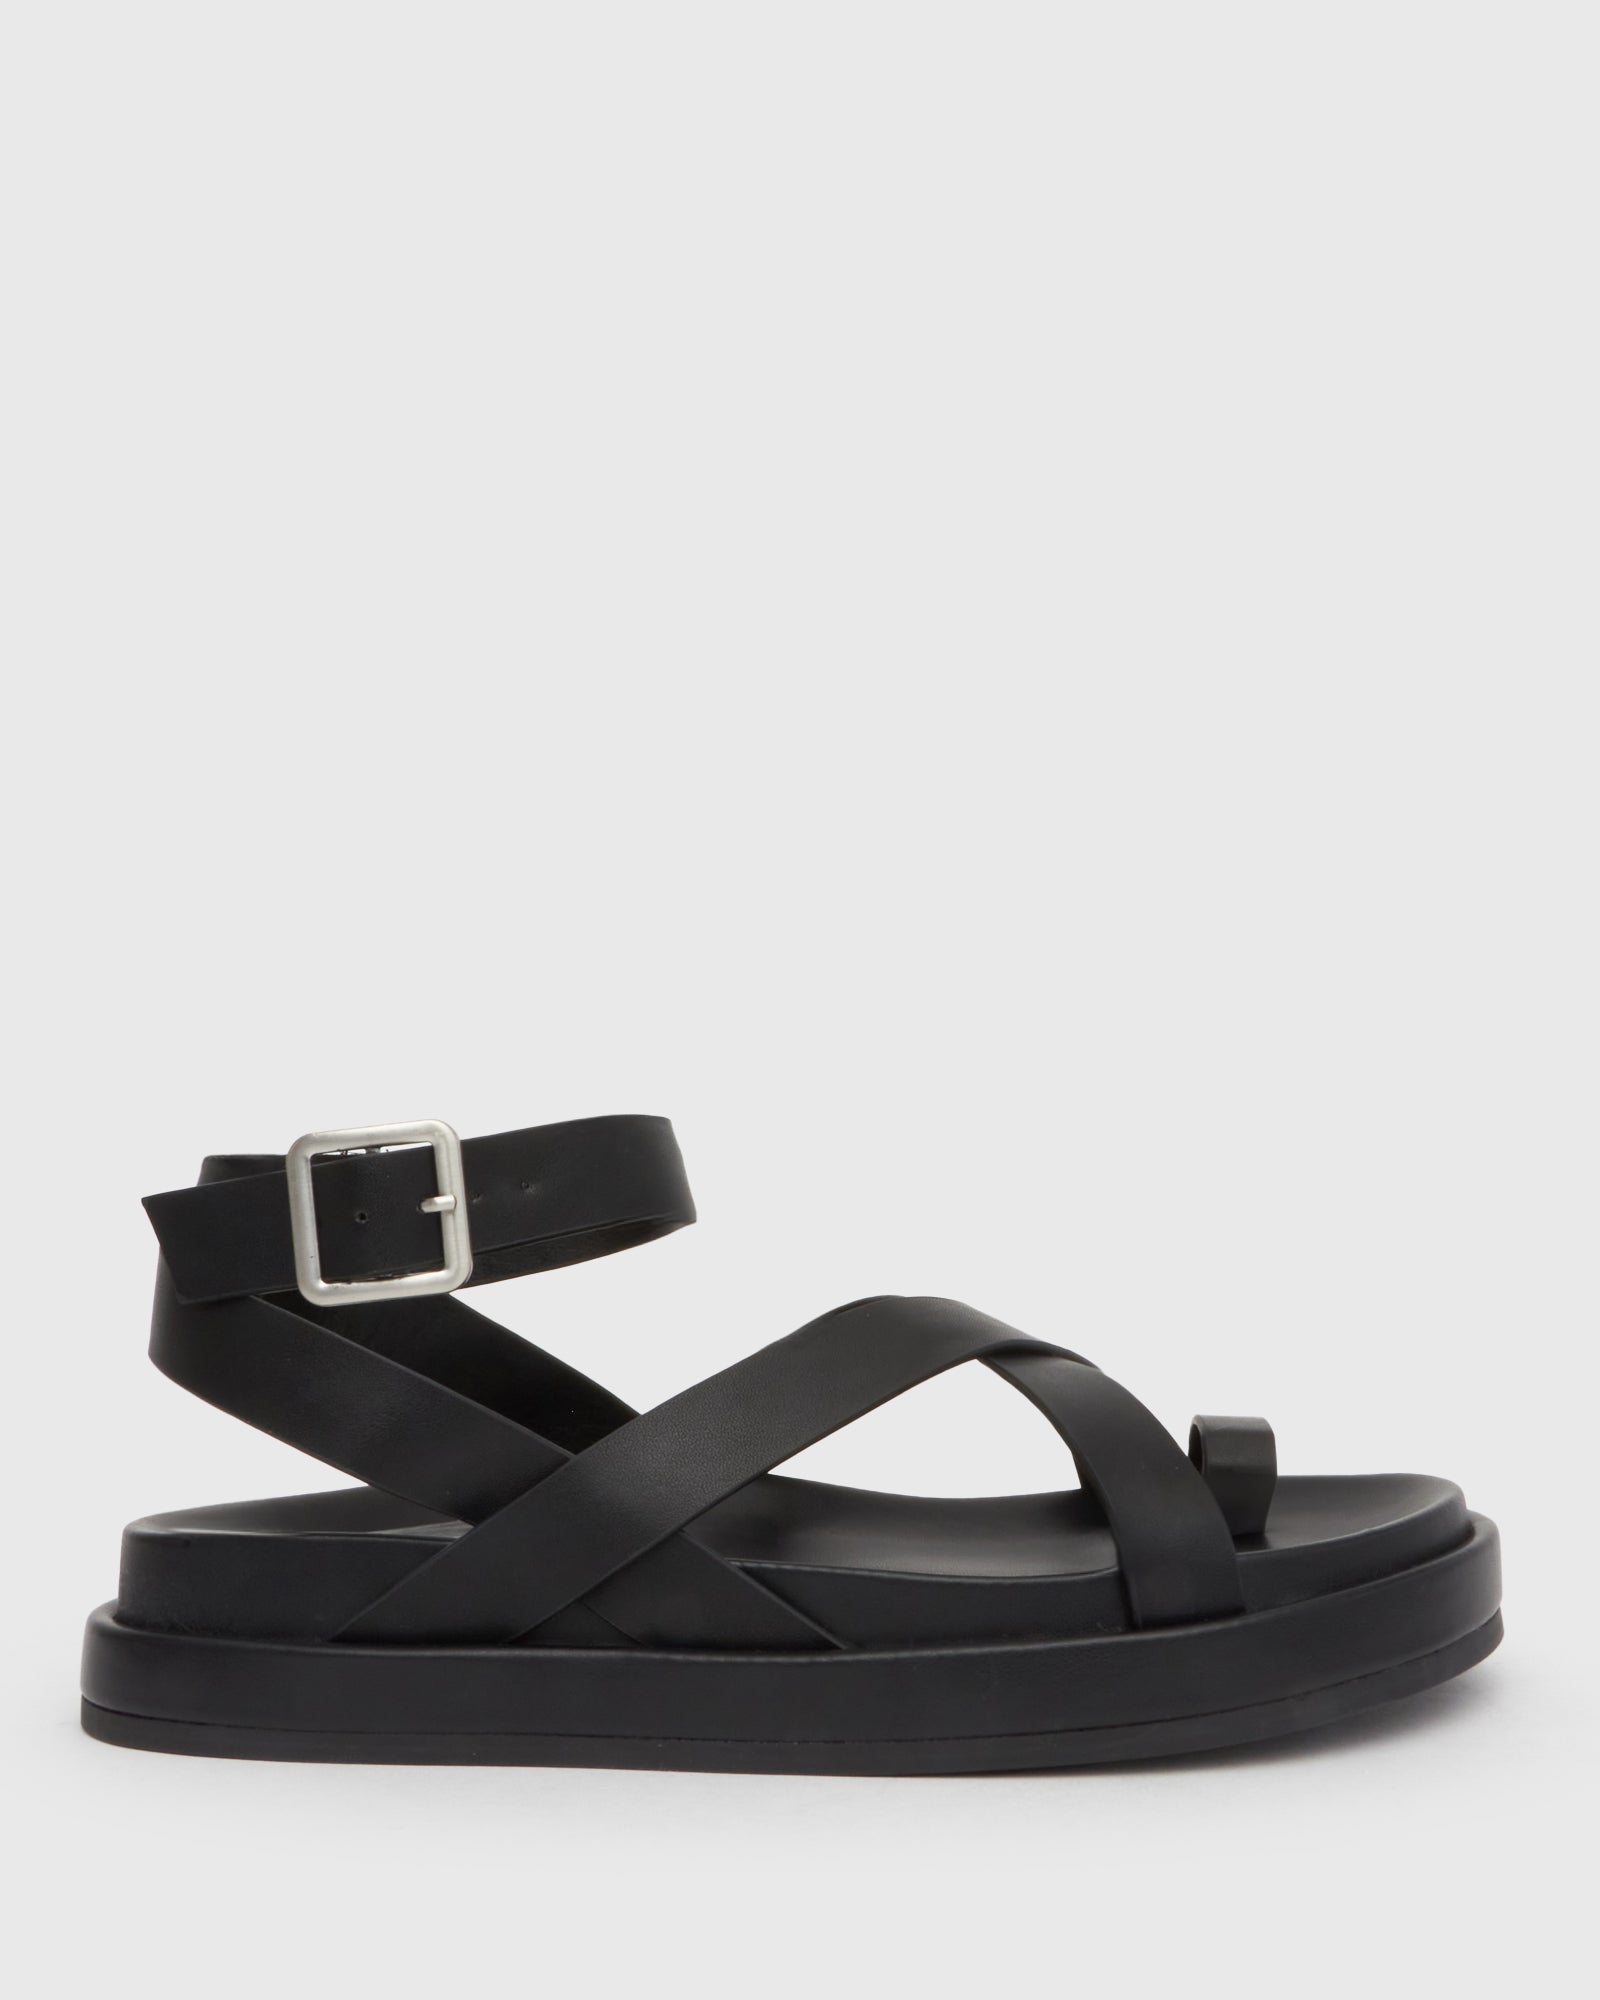 Buy BRISTOL Casual Footbed Sandals by Betts online - Betts